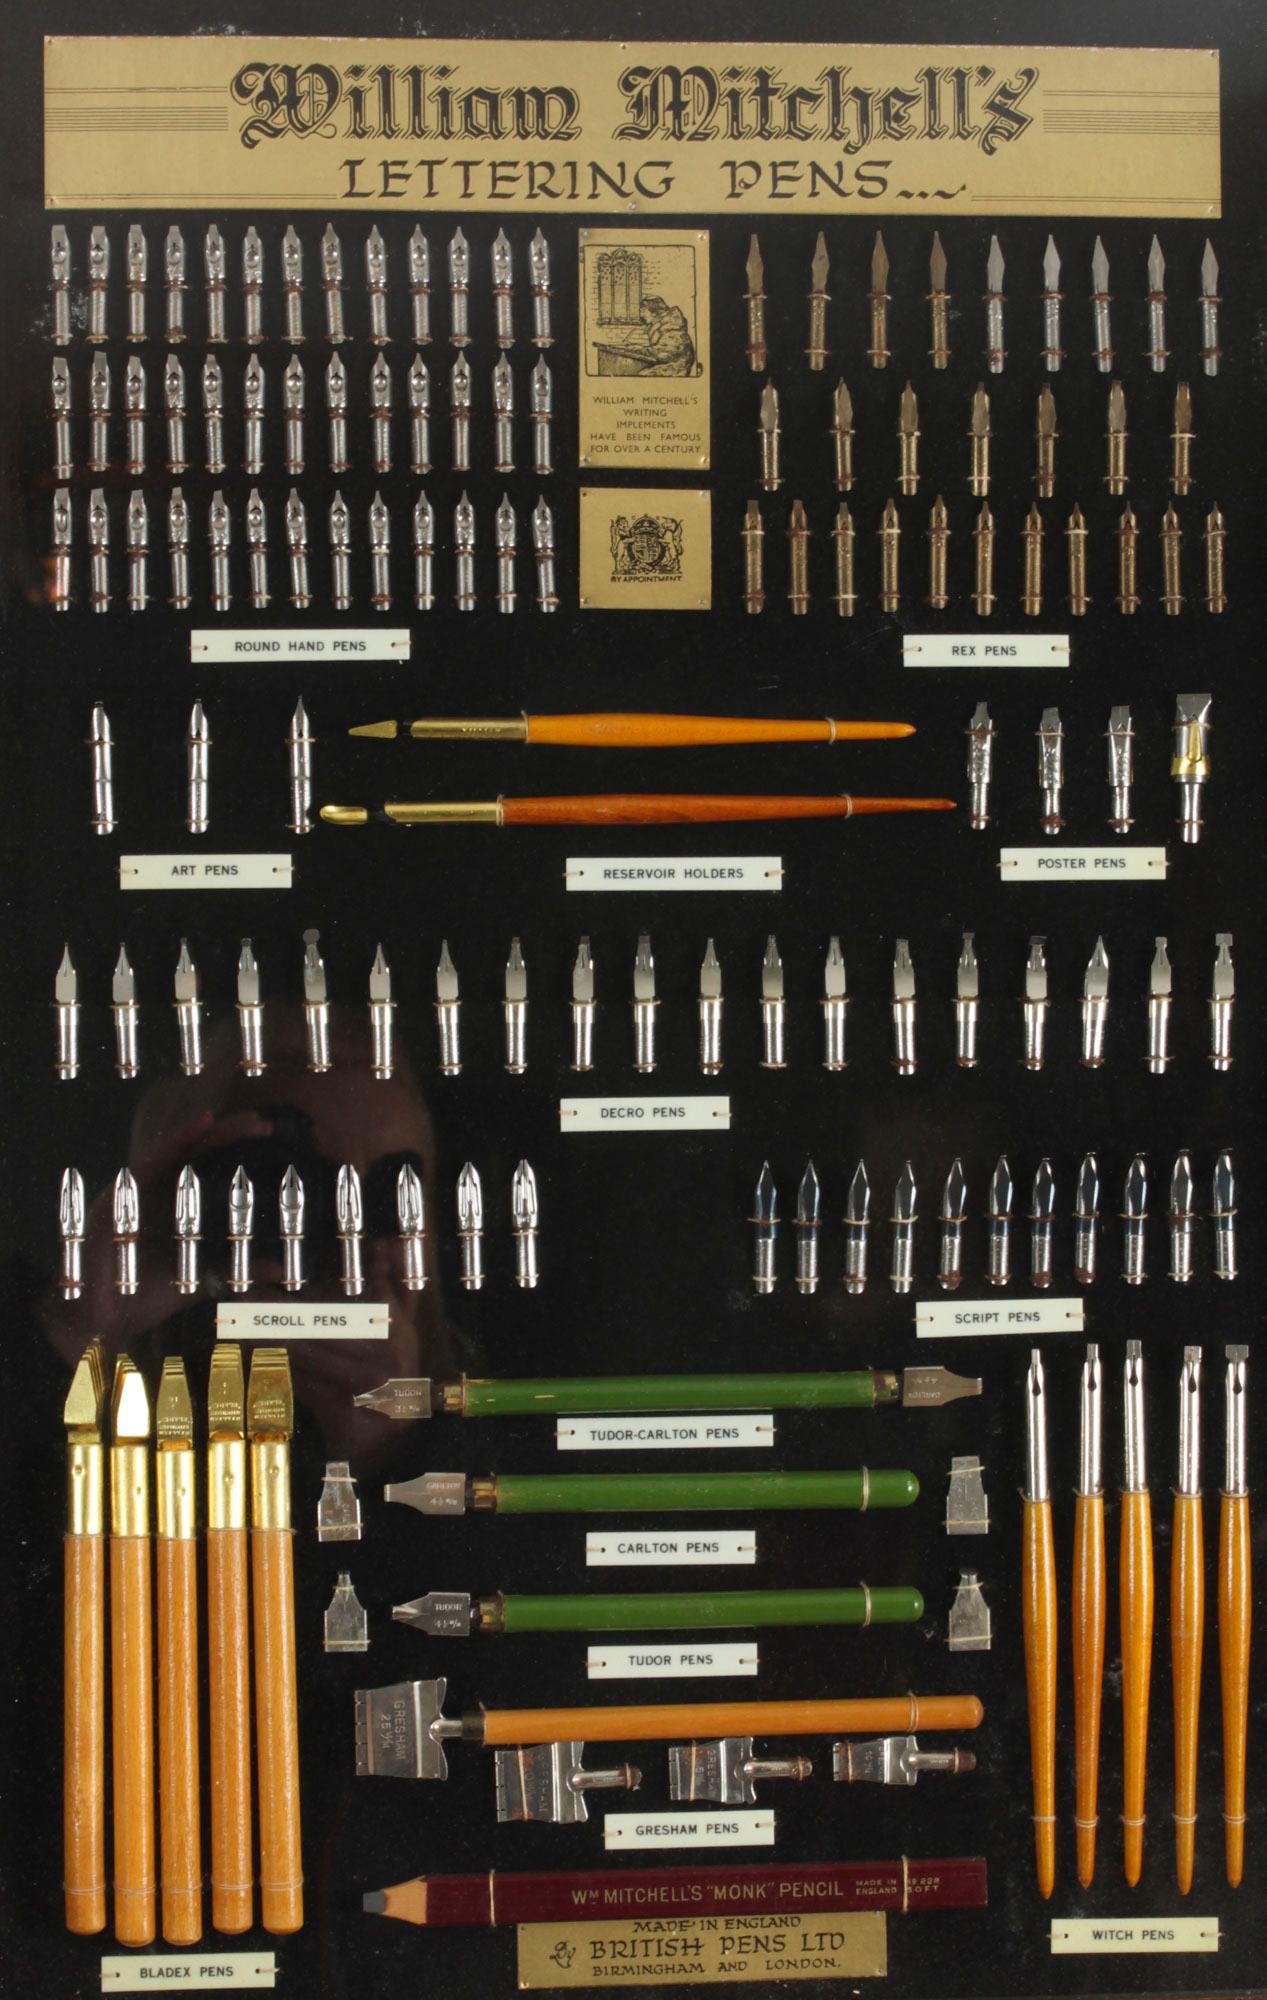 An unusual sample board advertising William Mitchell’s Lettering Pens containing numerous nibs and pens in its original oak wooden frame, and Circa 1920 in date.

Inscribed “William Mitchell’s Lettering Pens made in England, British Pens Ltd,